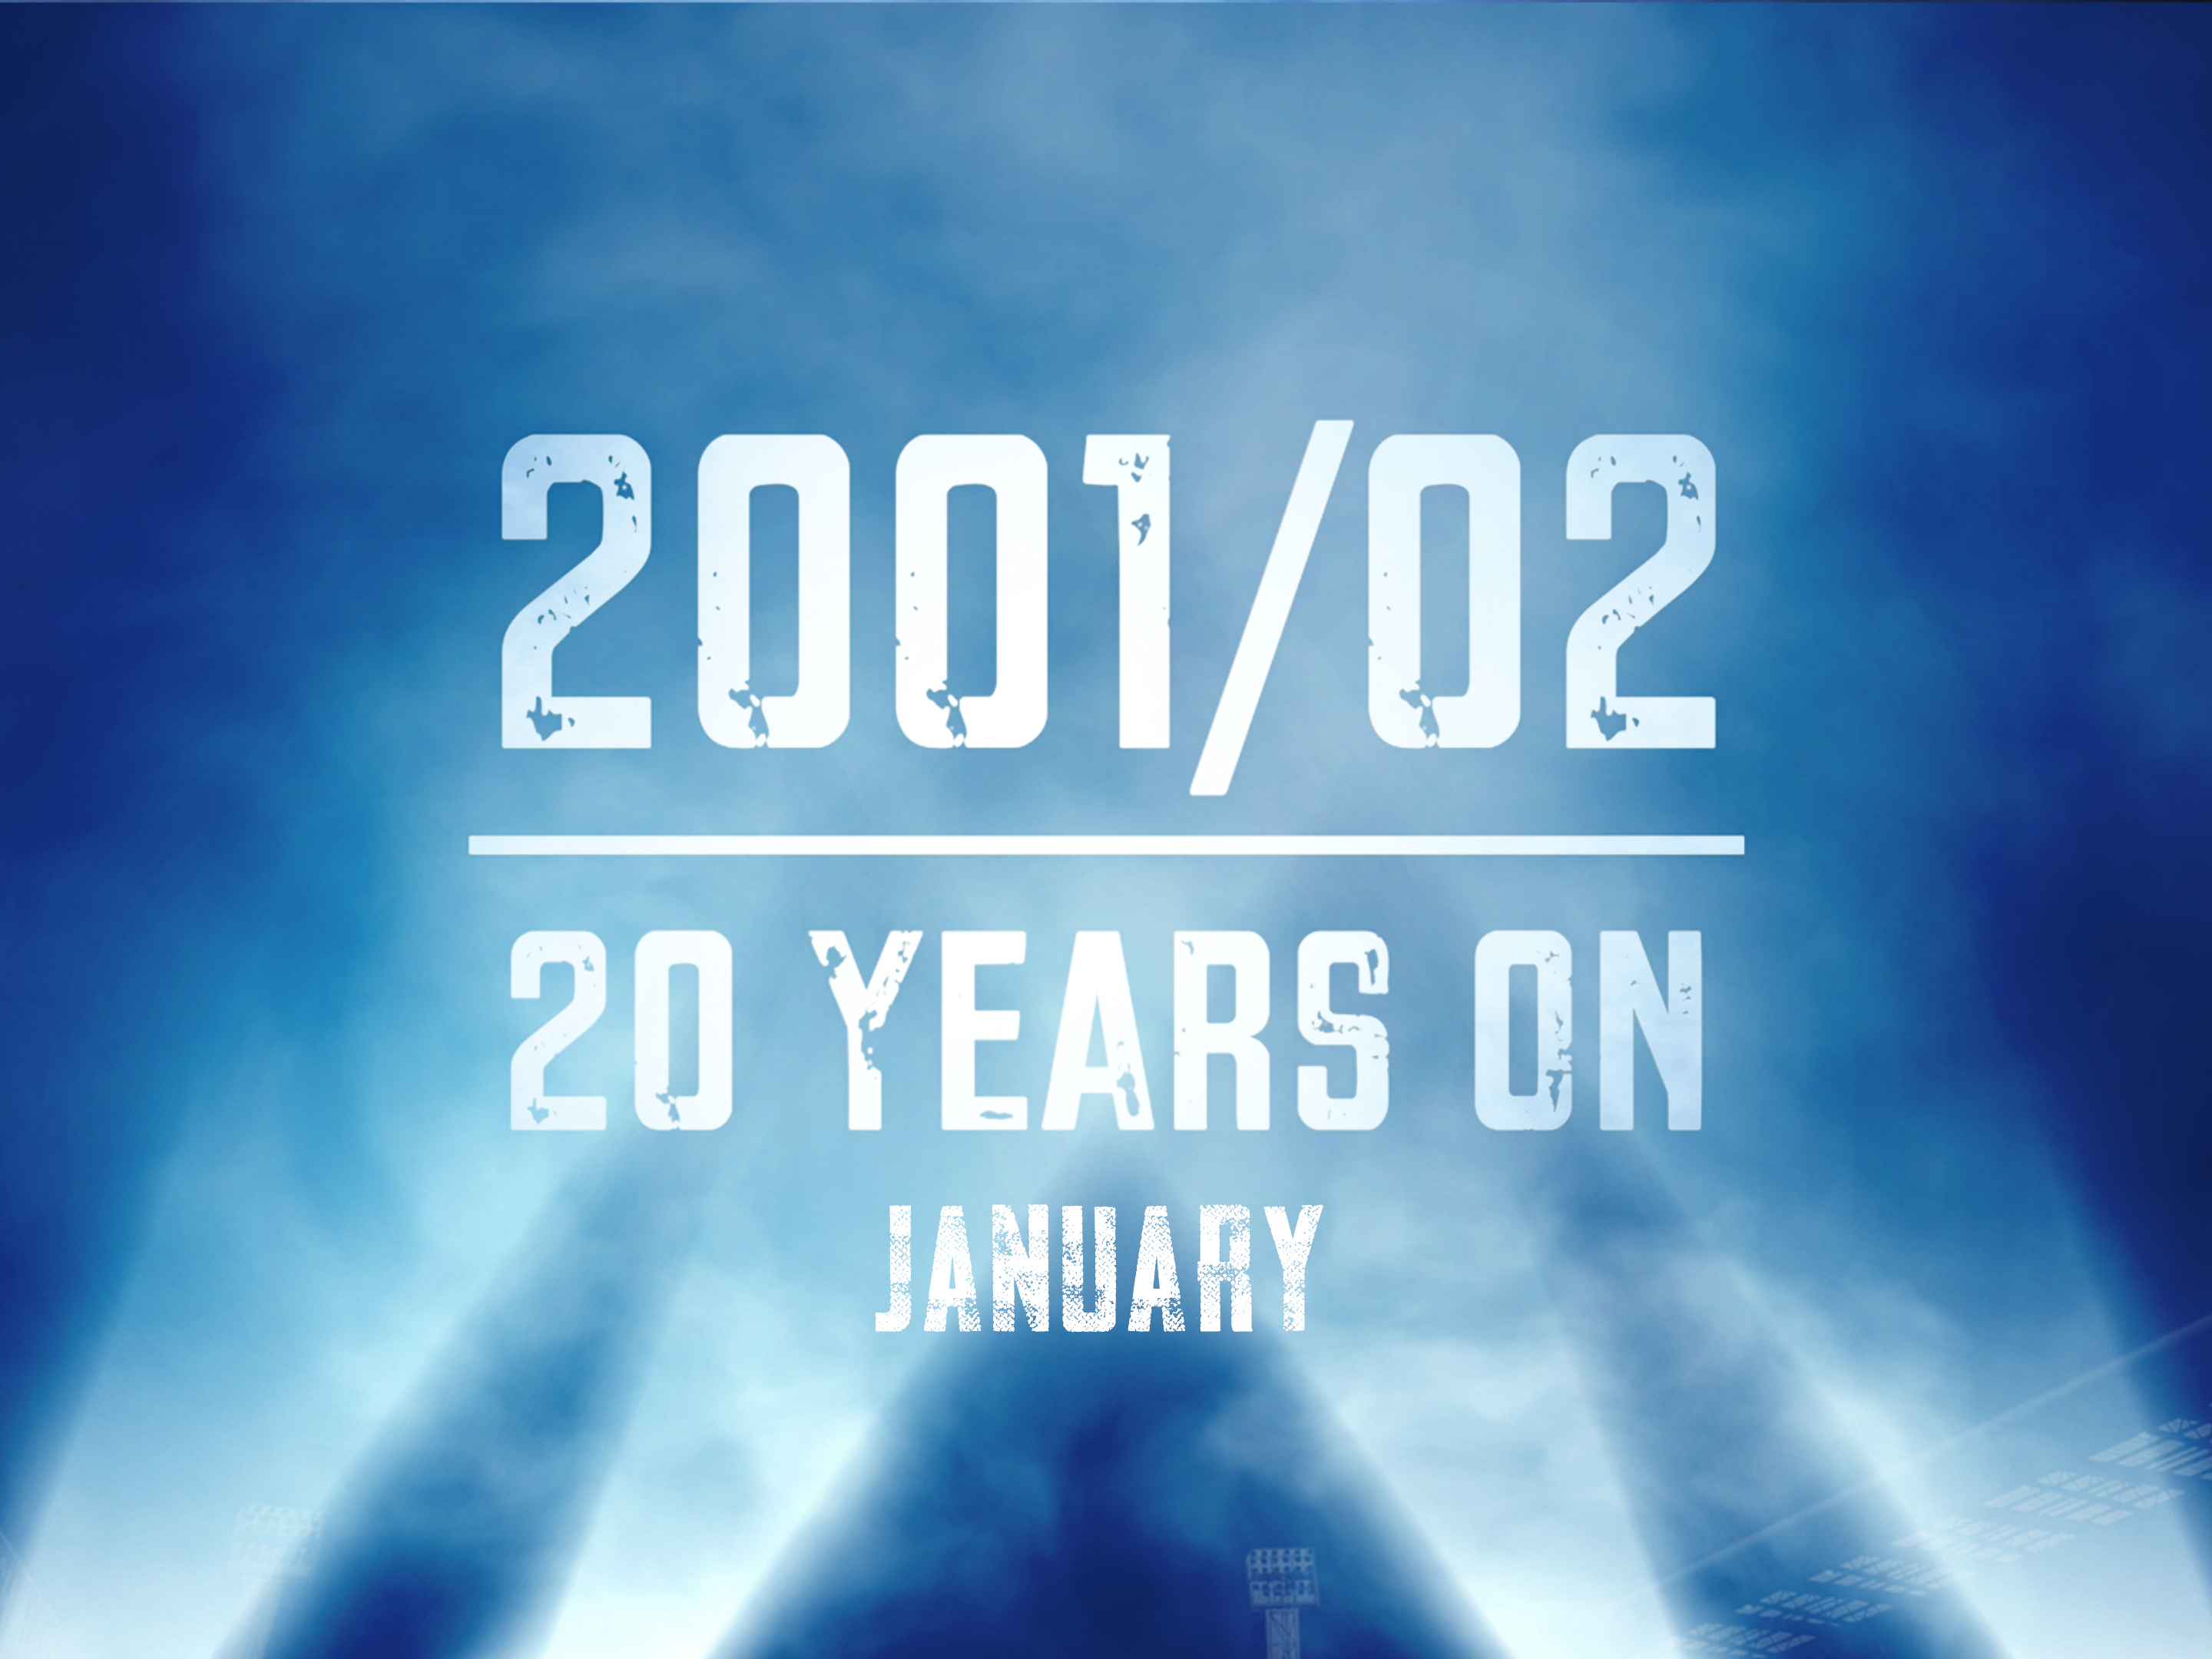 The sixth episode of '2001/02: 20 Years On' – the docuseries dedicated to reliving all the best bits of the club’s promotion-winning campaign two decades ago – is now online